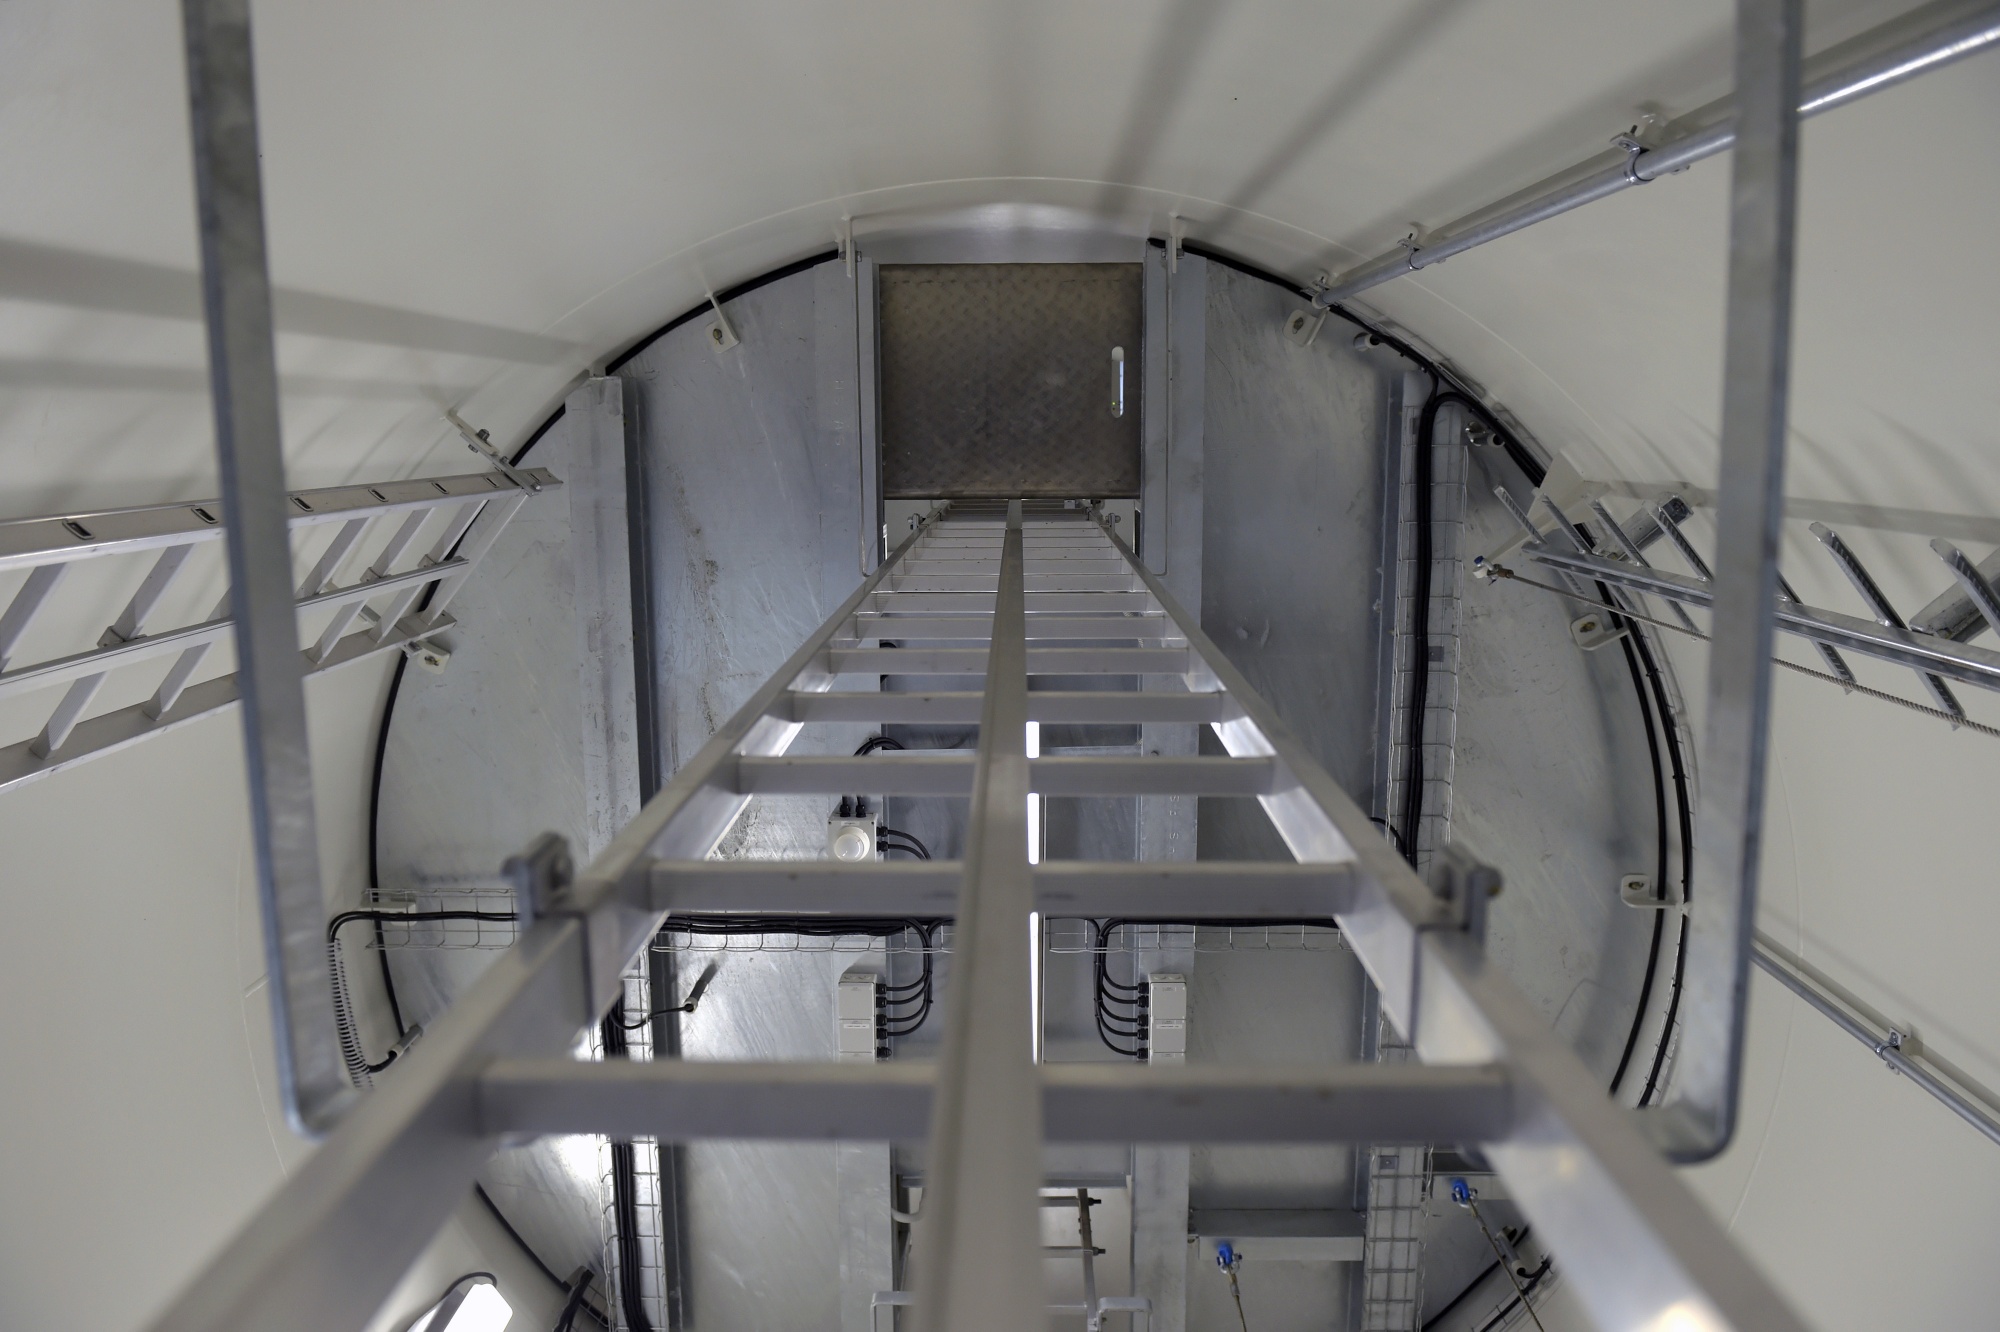 A ladder for heights training at the wind turbine training tower.